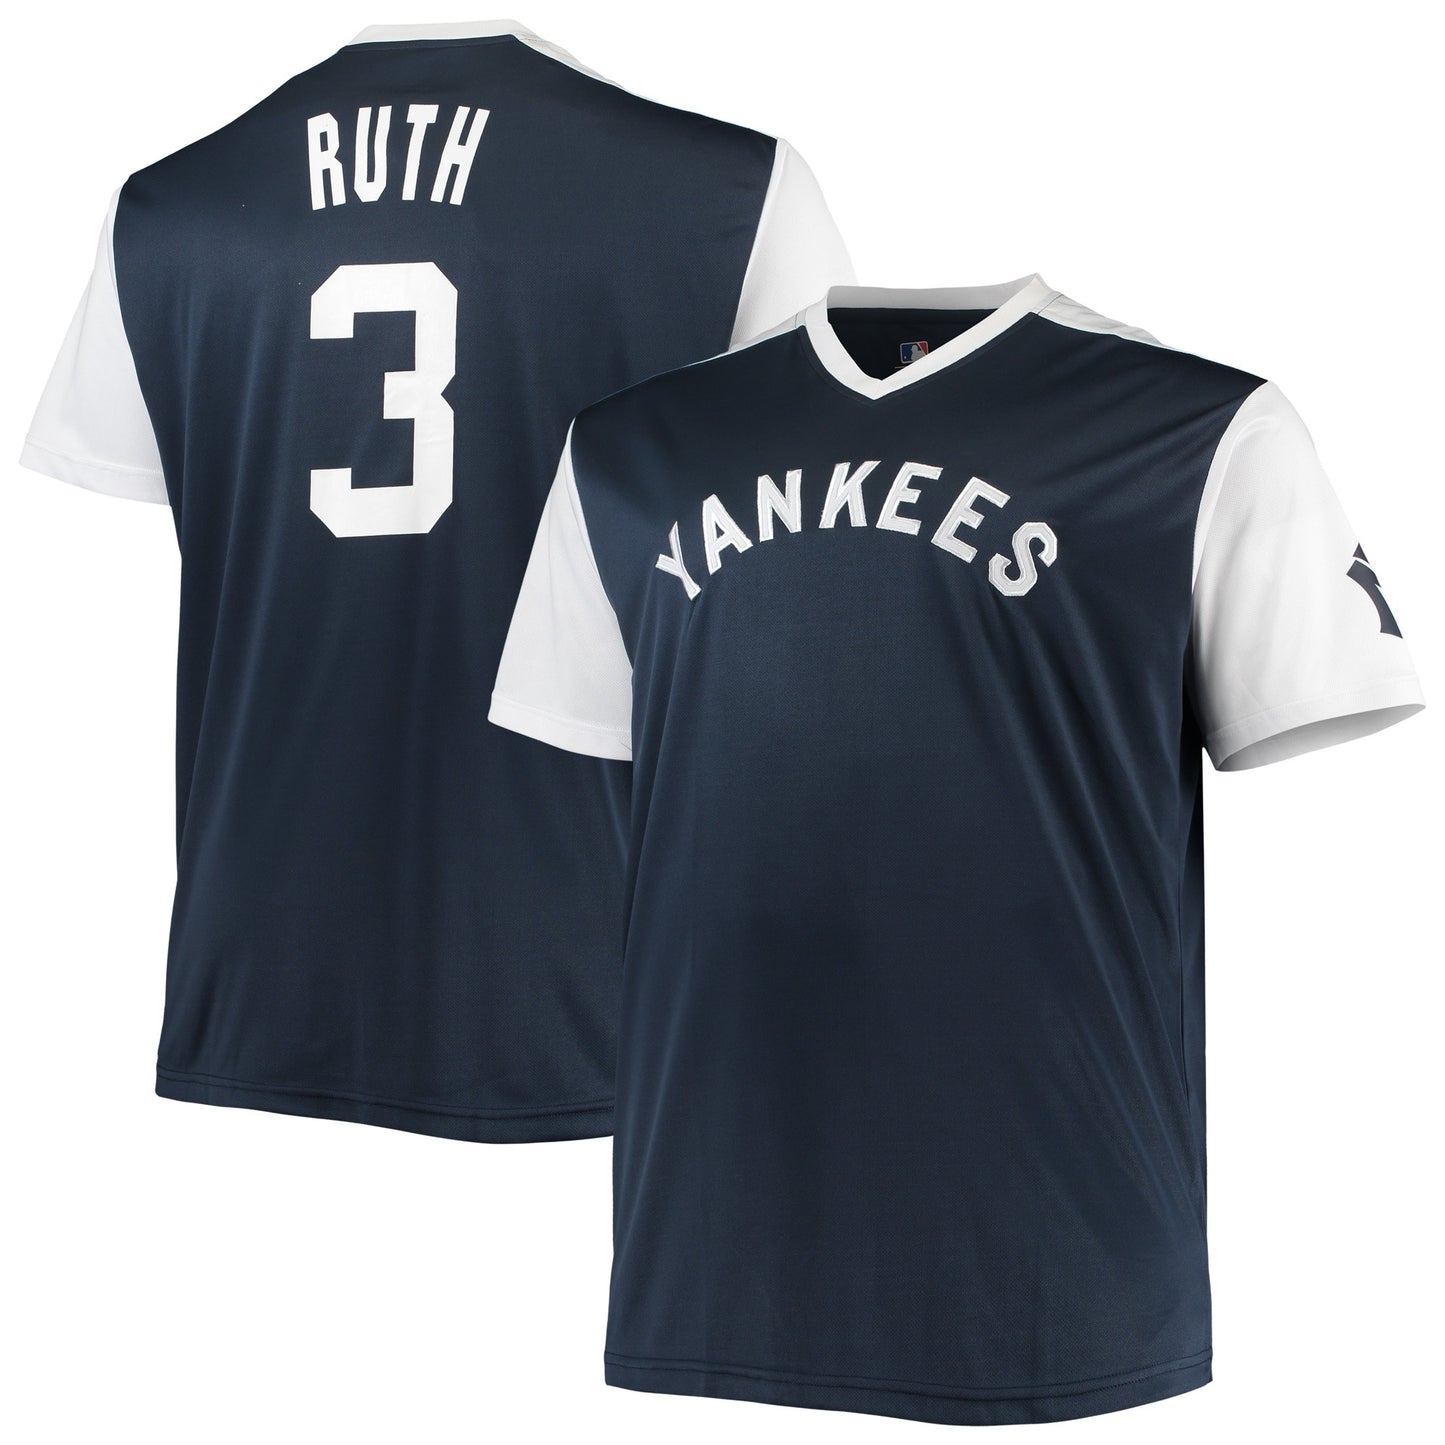 Babe Ruth New York Yankees Cooperstown Collection Replica Player Jersey - Navy/White